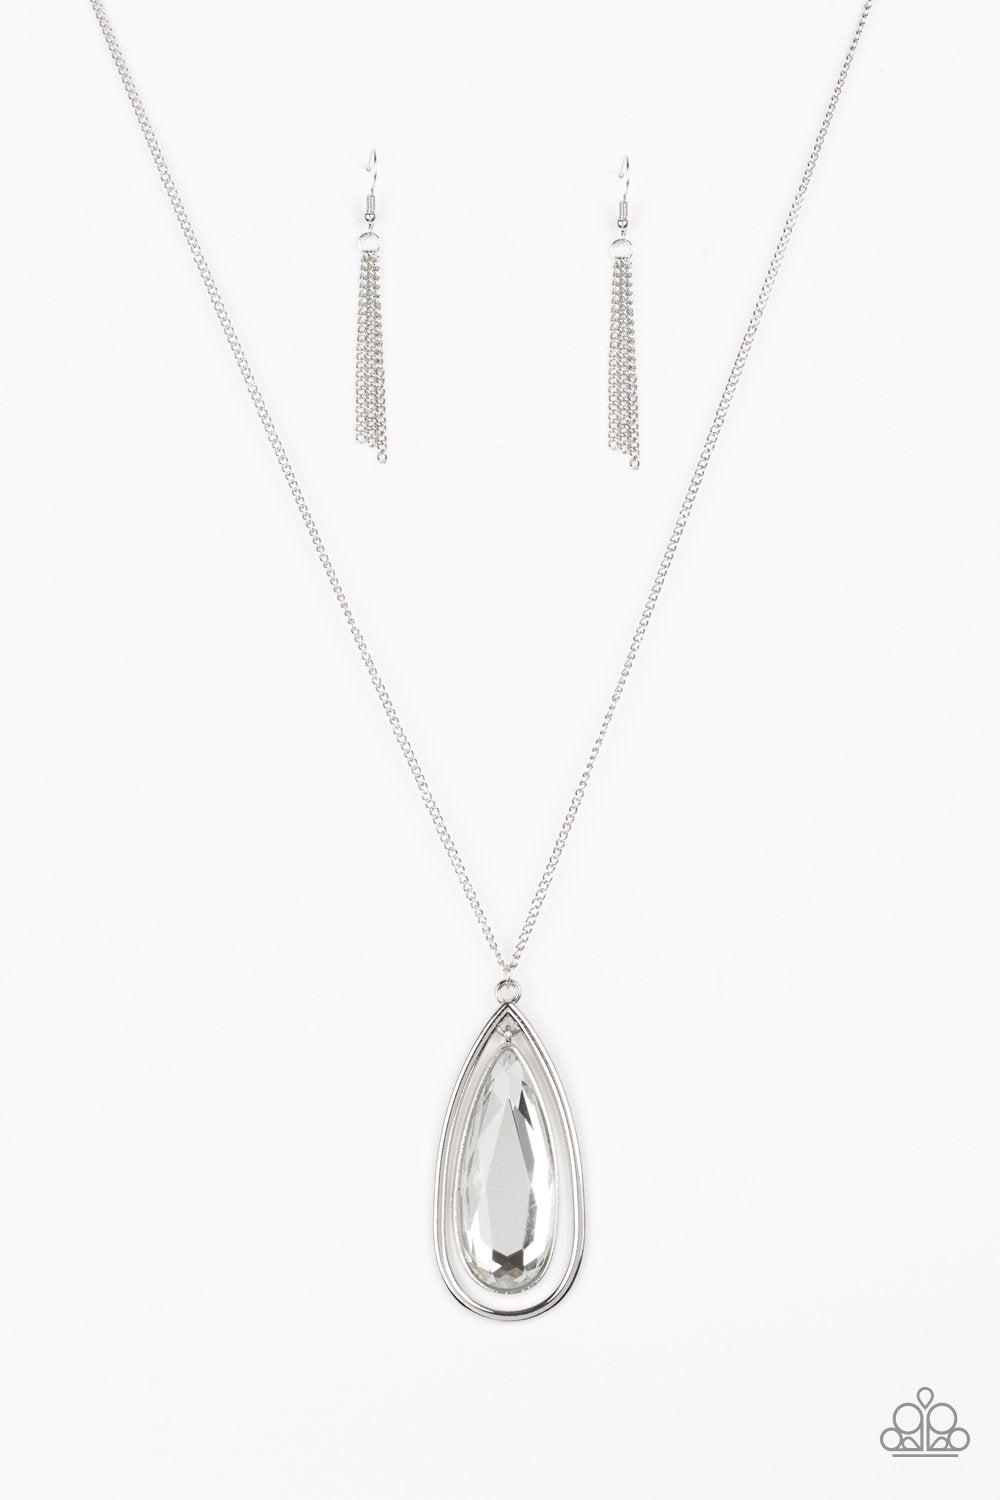 The Royal Coronation Silver and White Rhinestone Teardrop Necklace - Paparazzi Accessories-CarasShop.com - $5 Jewelry by Cara Jewels